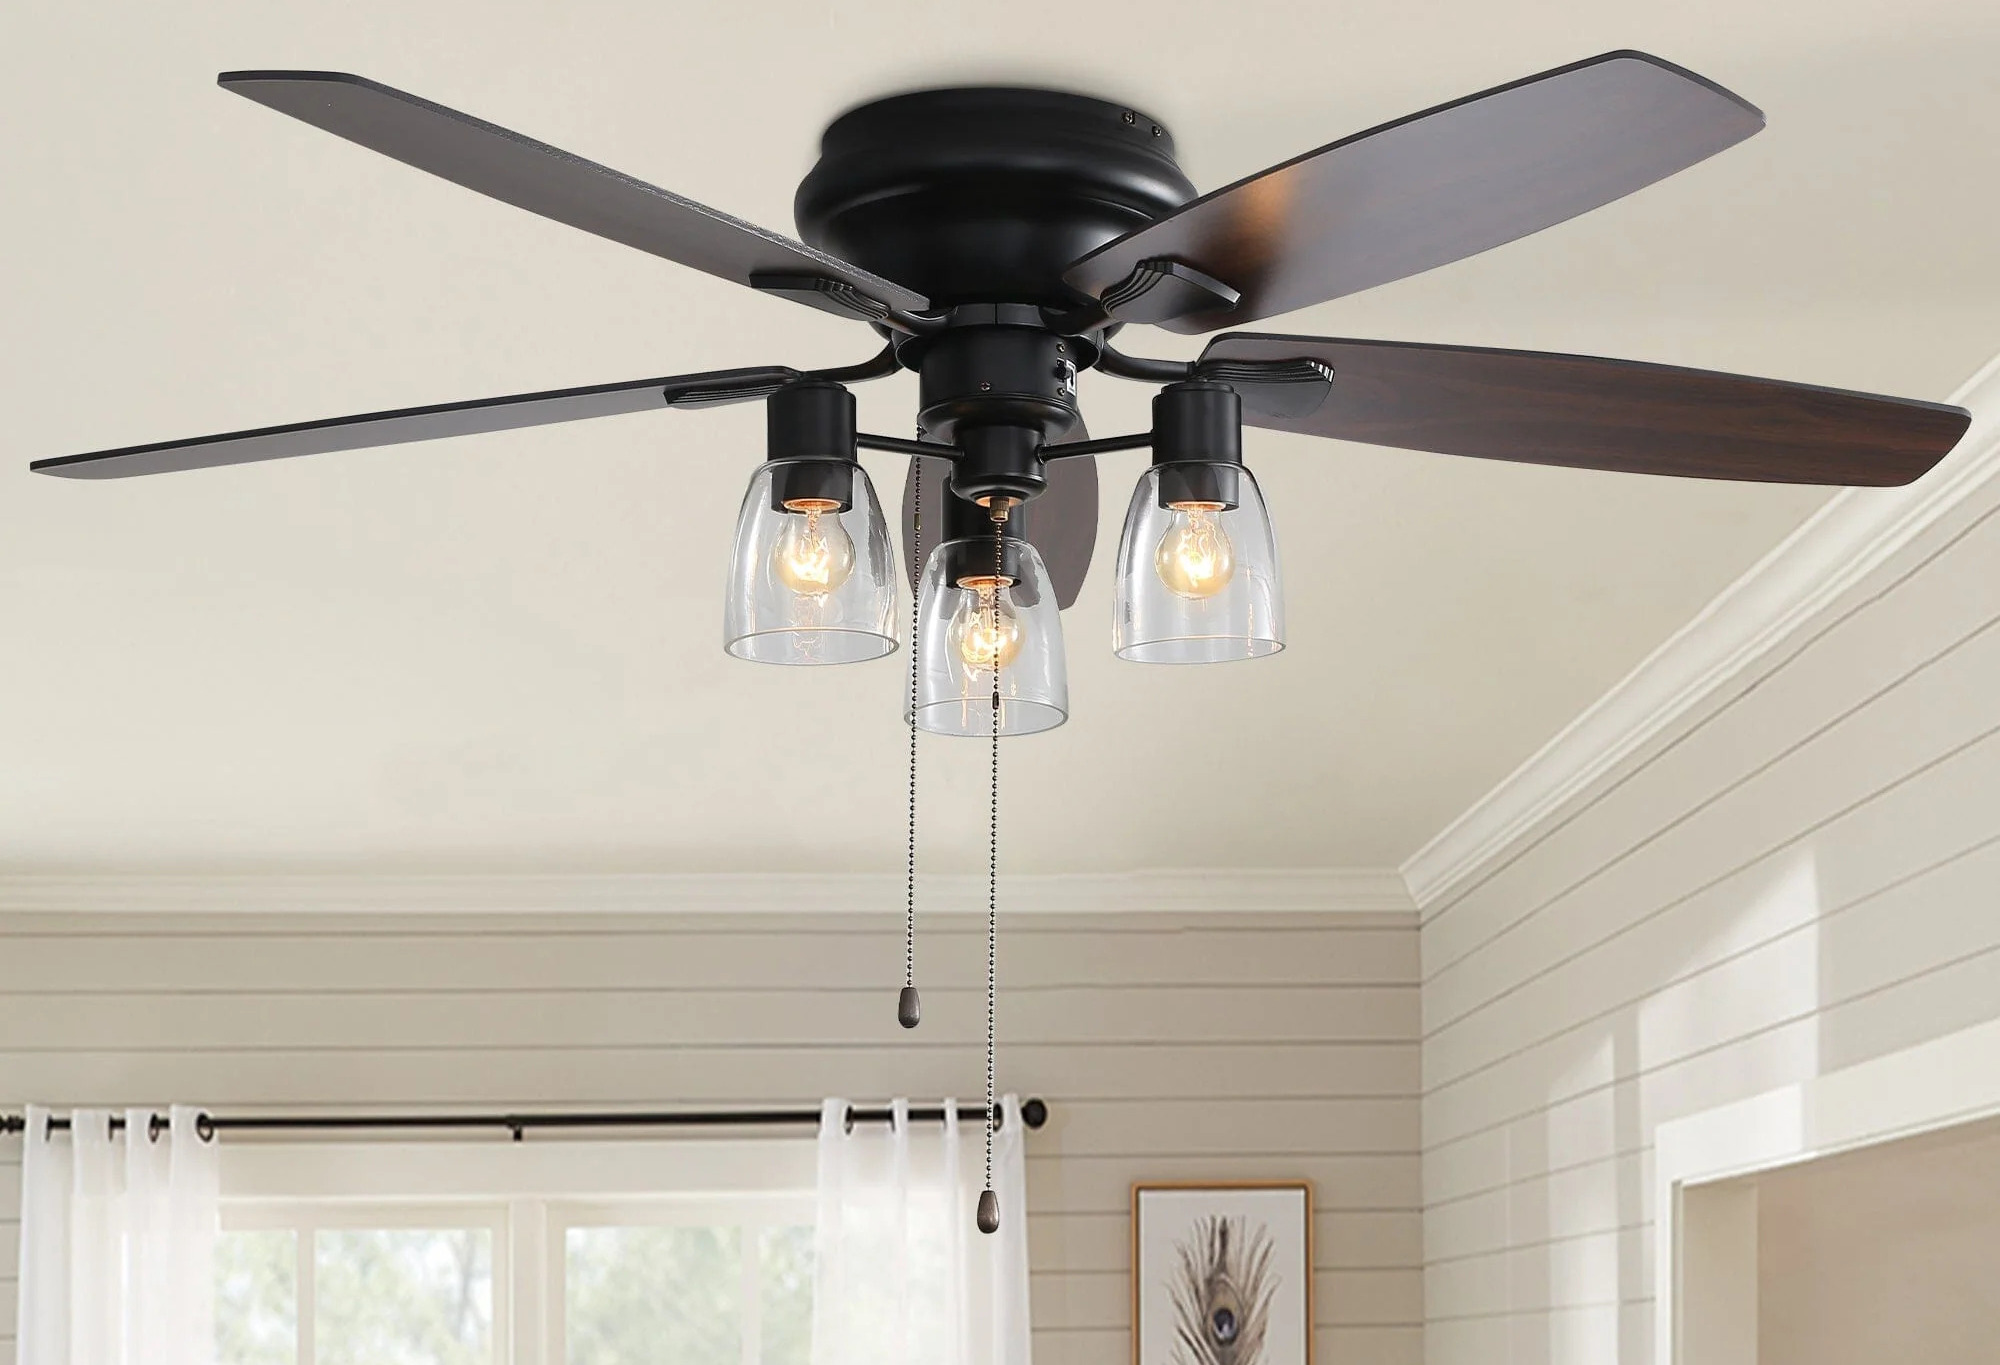 We just bought a Hampton bay Larson ceiling fan SKU 337 762. On the box it  shows that it can be flush mounted, but